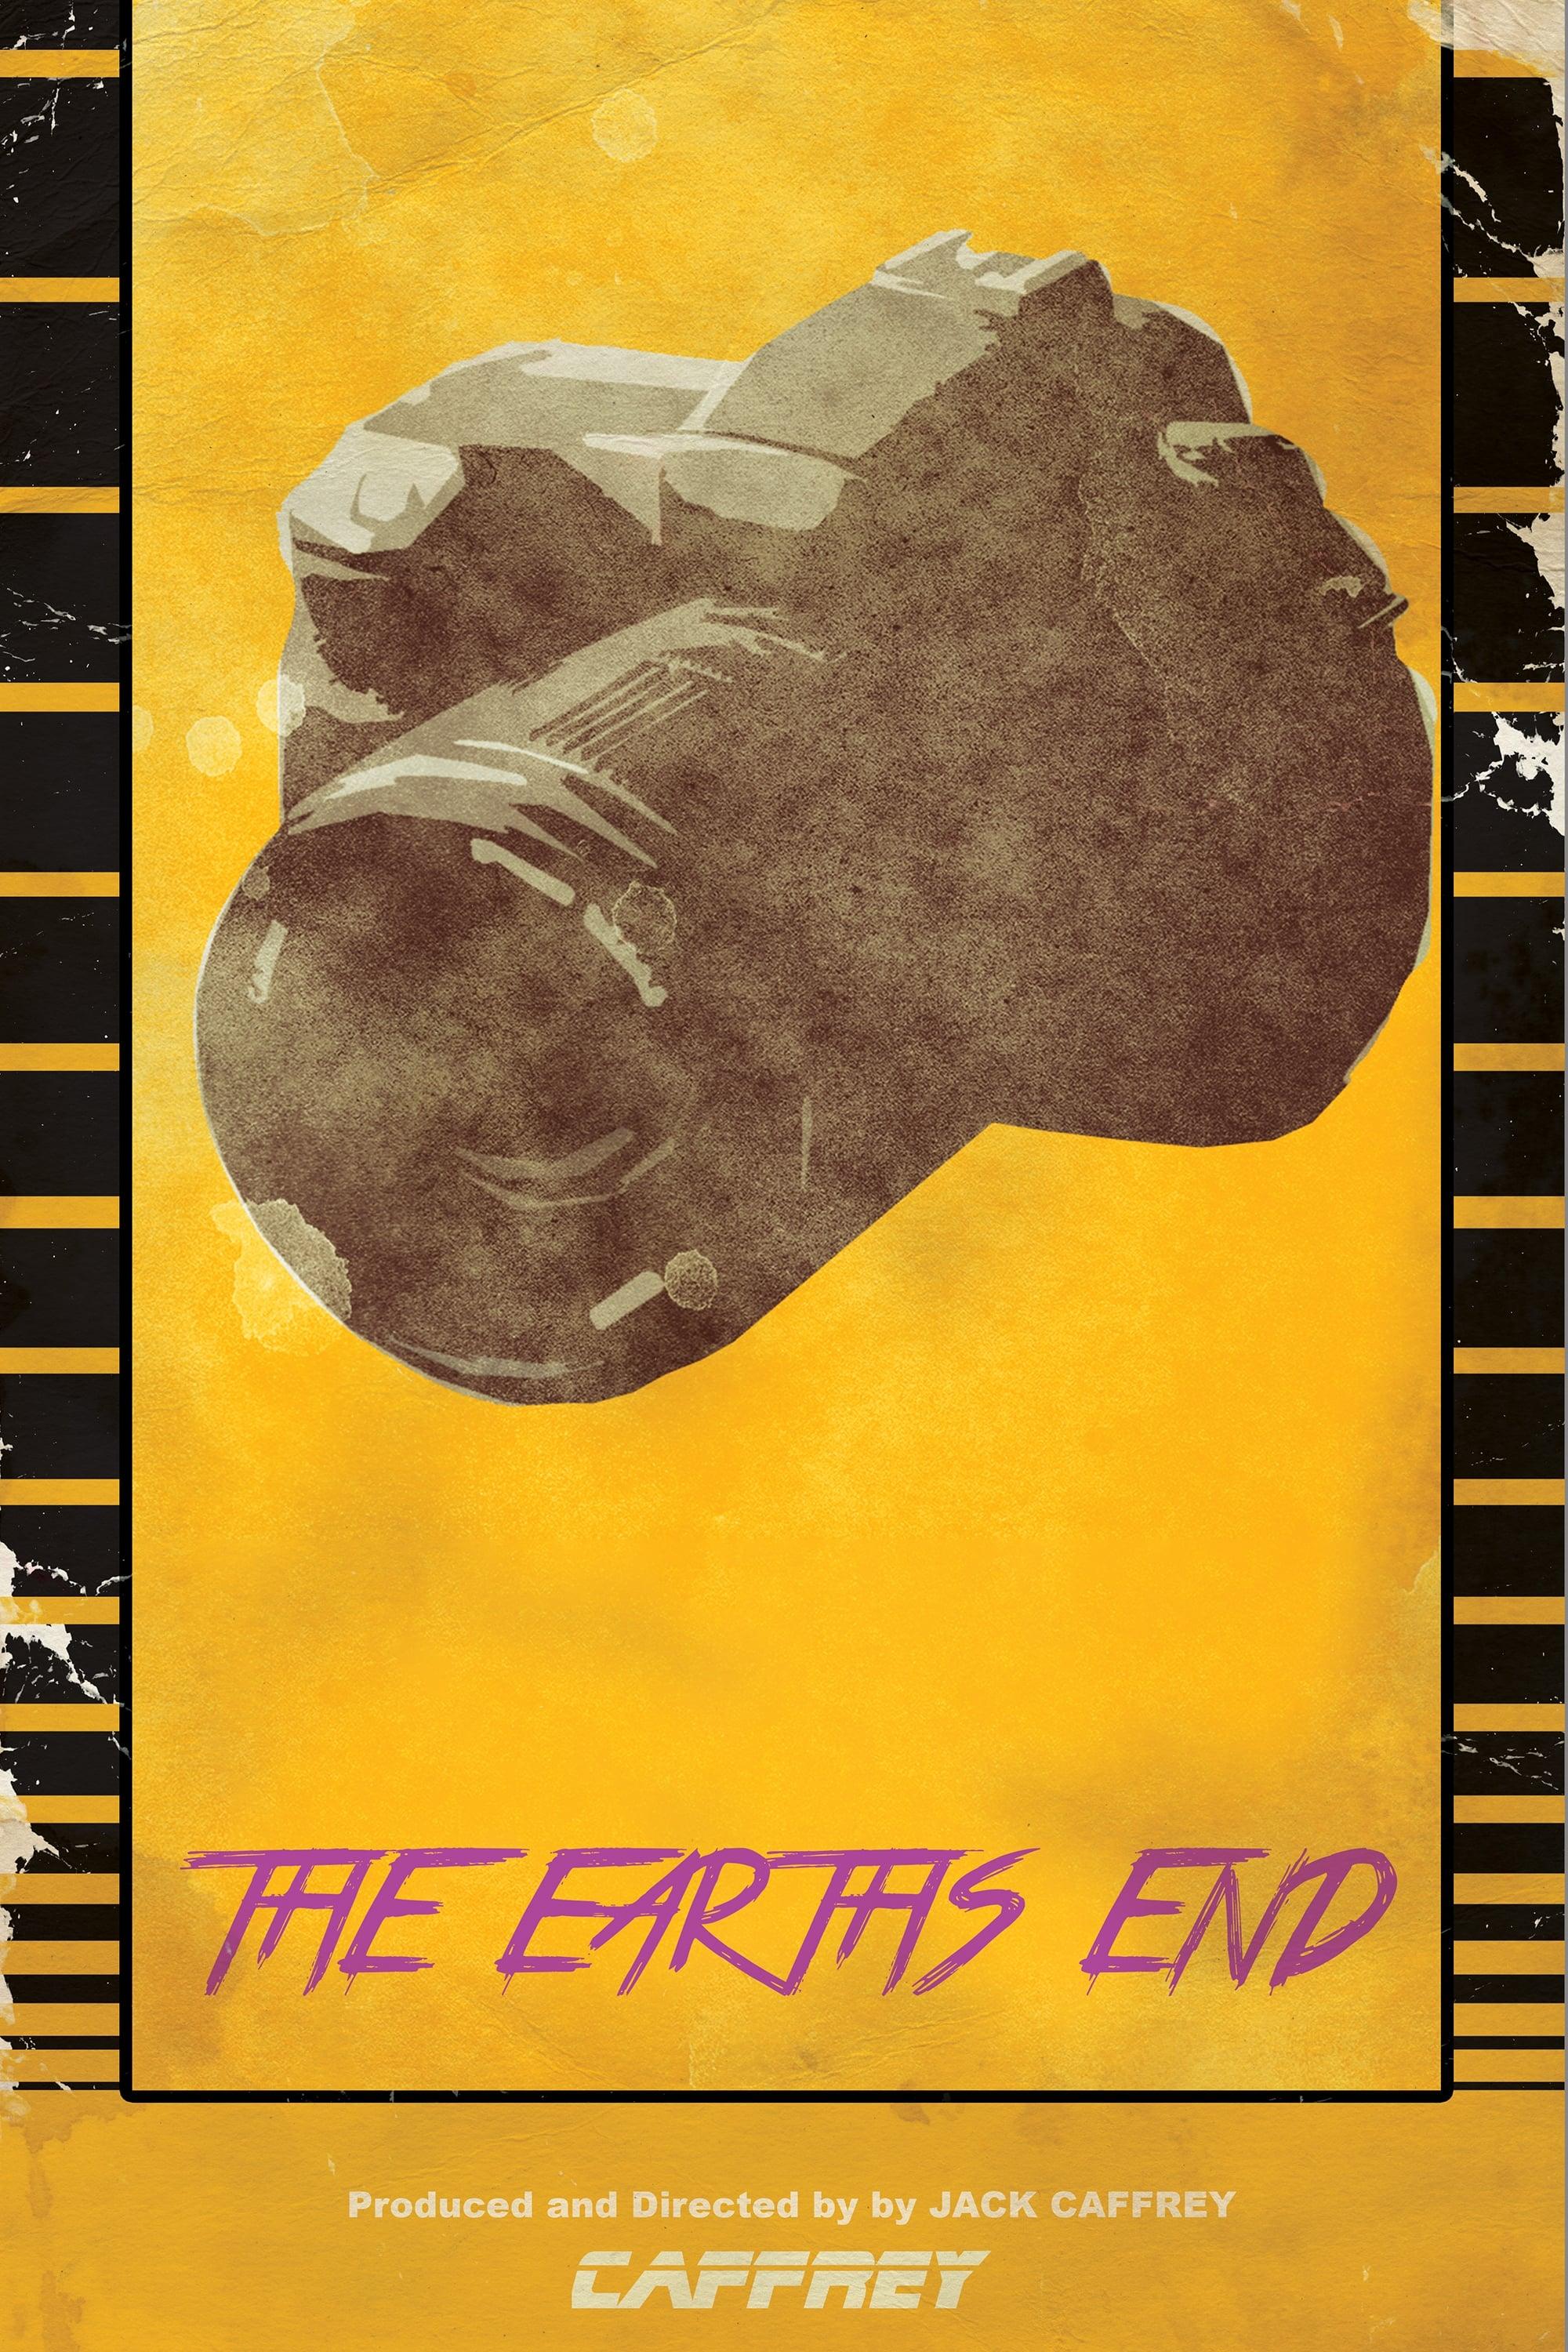 The Earth's End poster